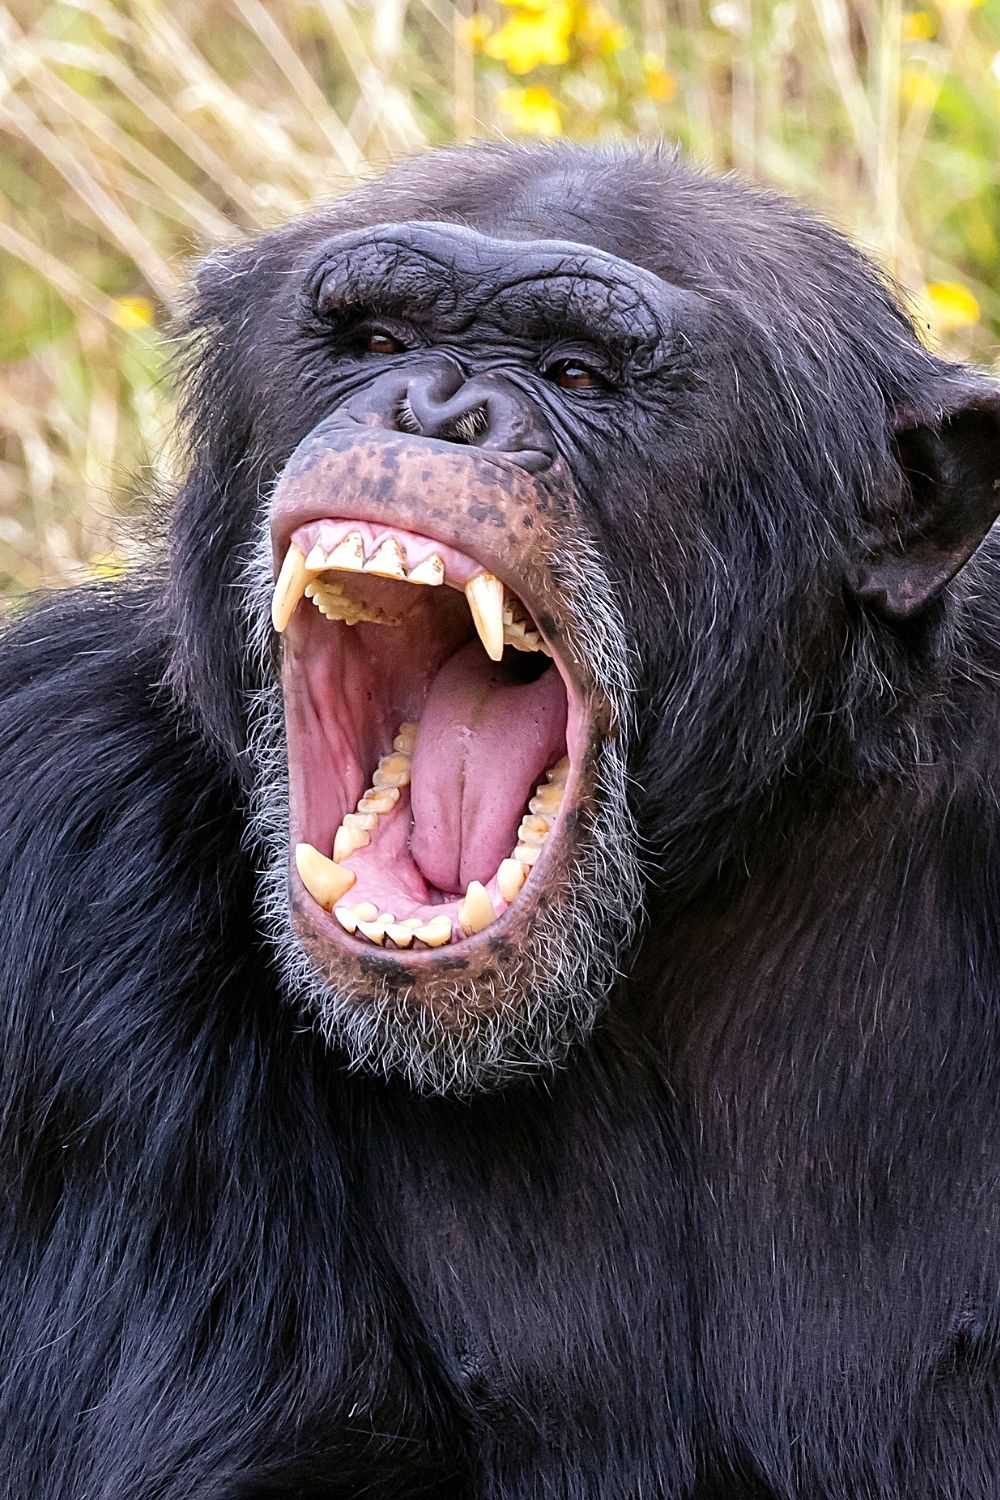 Chimpanzees have displayed symptoms that are similar to Trisomy 21 or Down Syndrome in humans